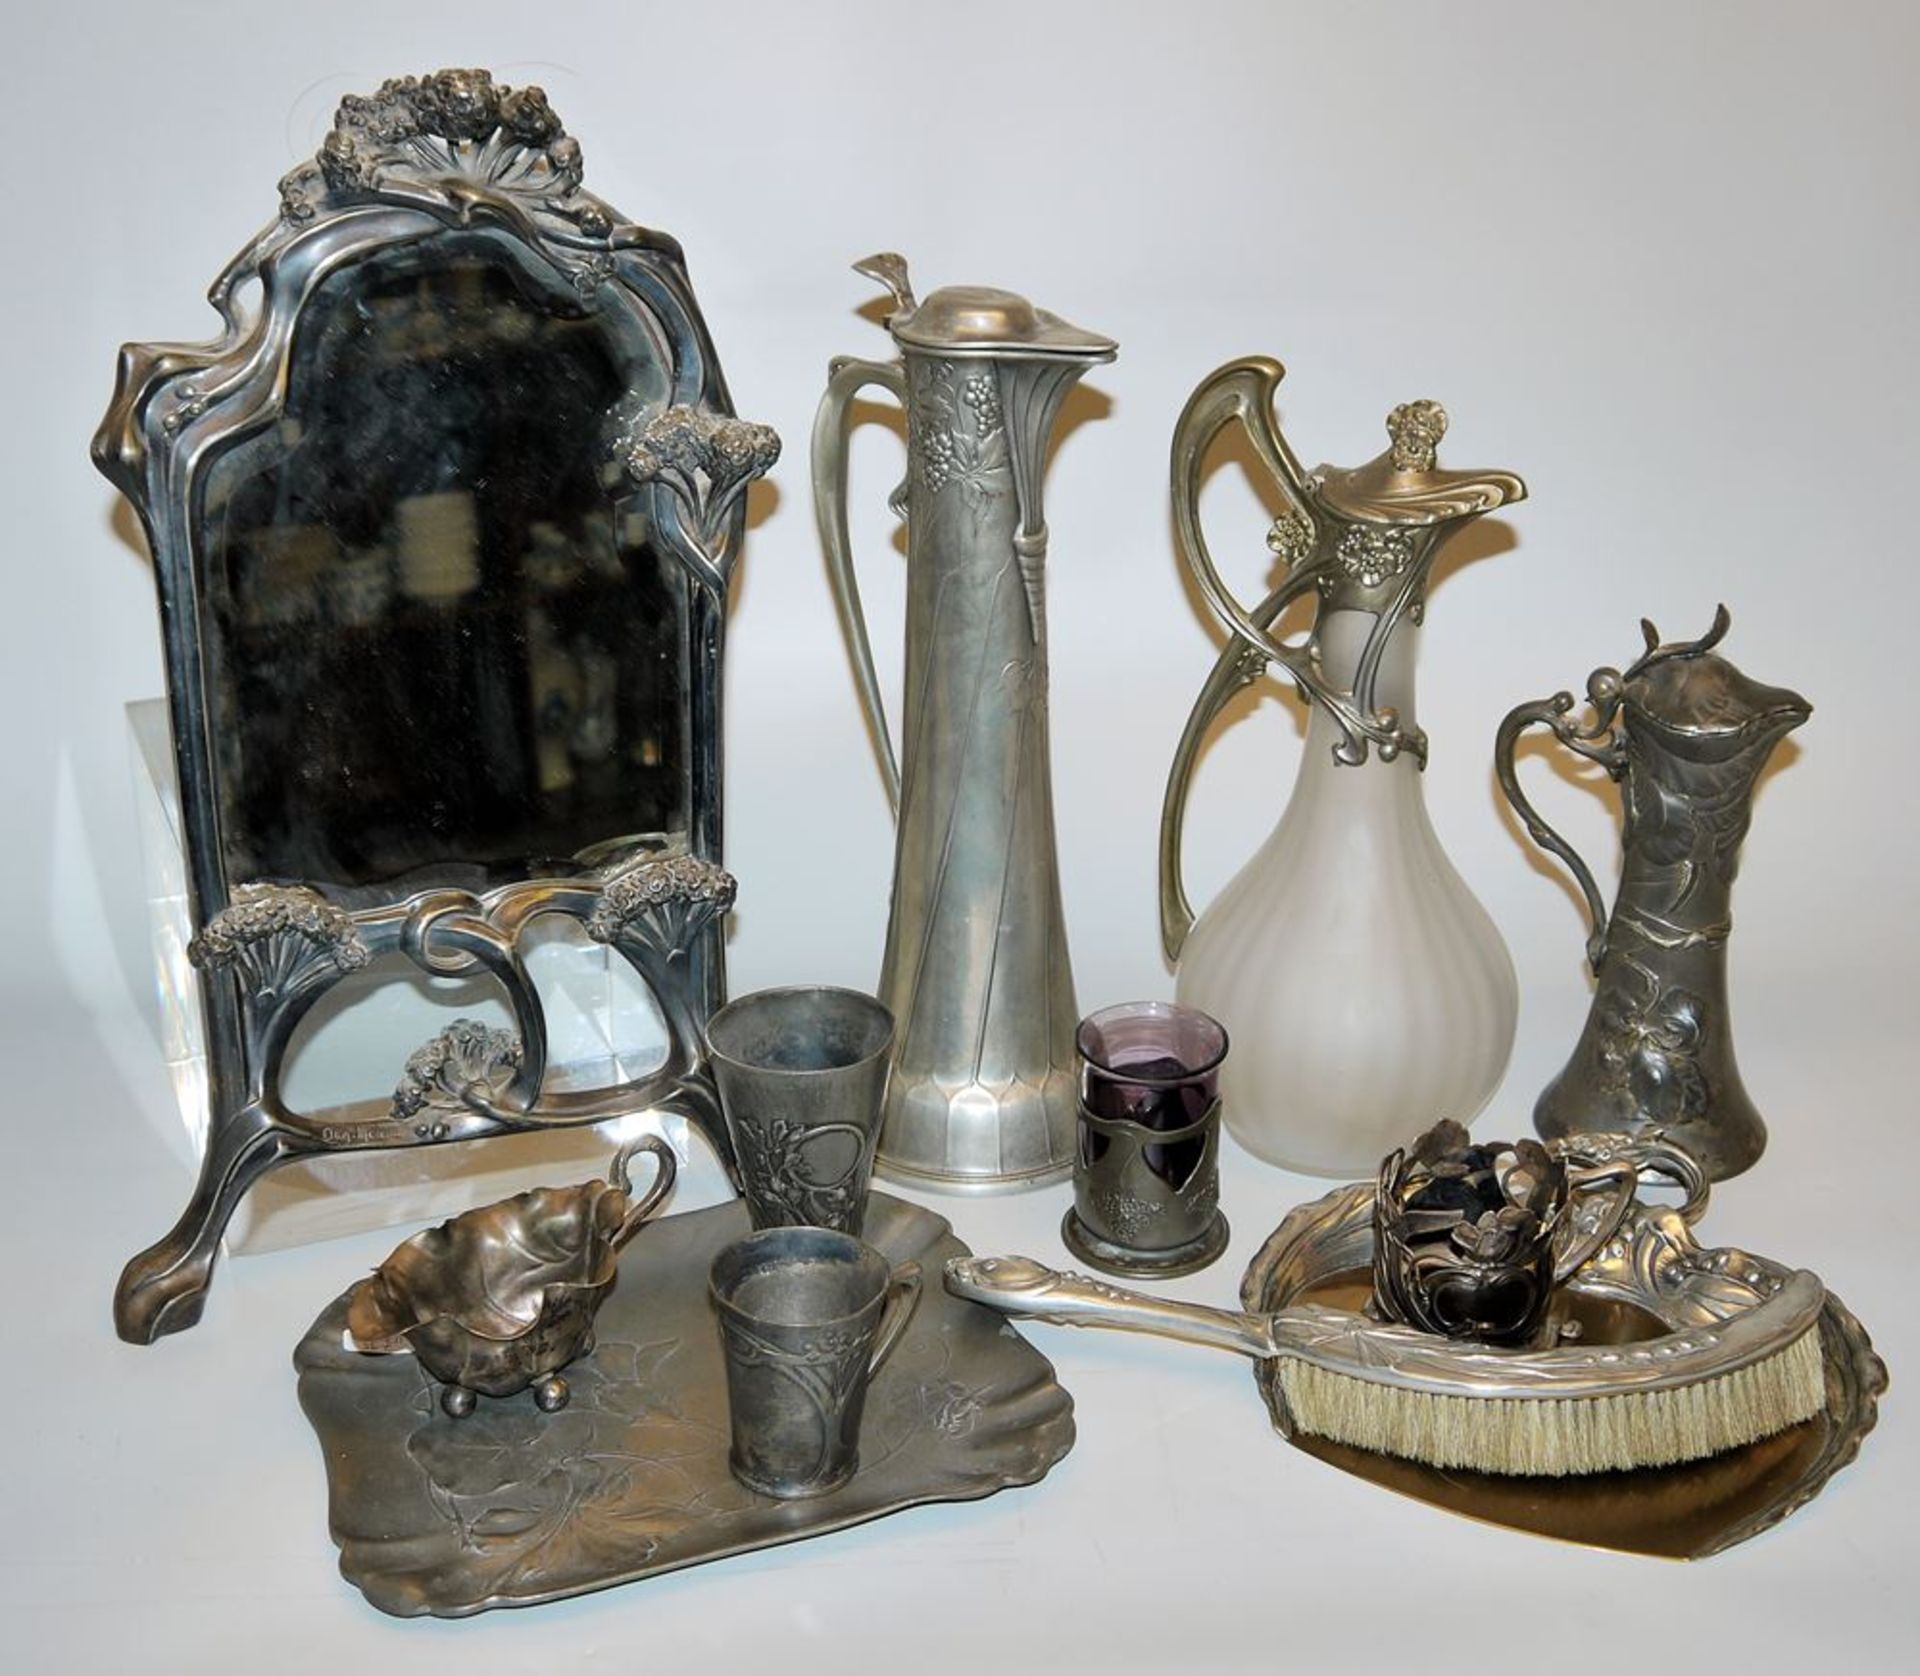 Mirror "Ombelles" by August Moreau and large collection of Art Nouveau pewter, Osiris, Orivit, WMF 